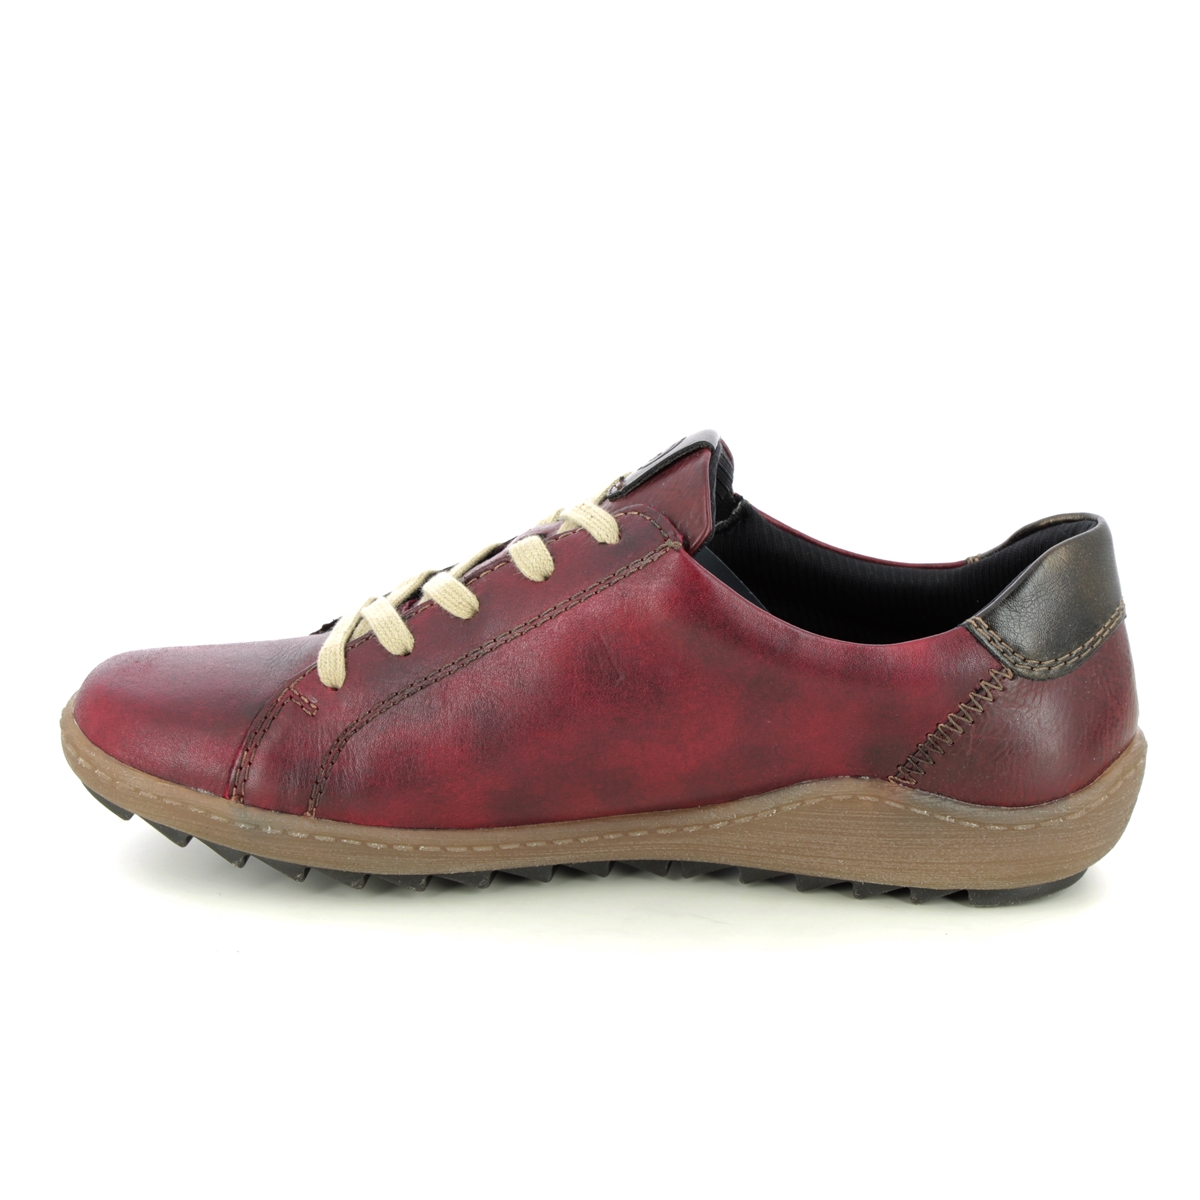 Remonte R1426-35 Zigspo Tex 15 Wine Womens lacing shoes